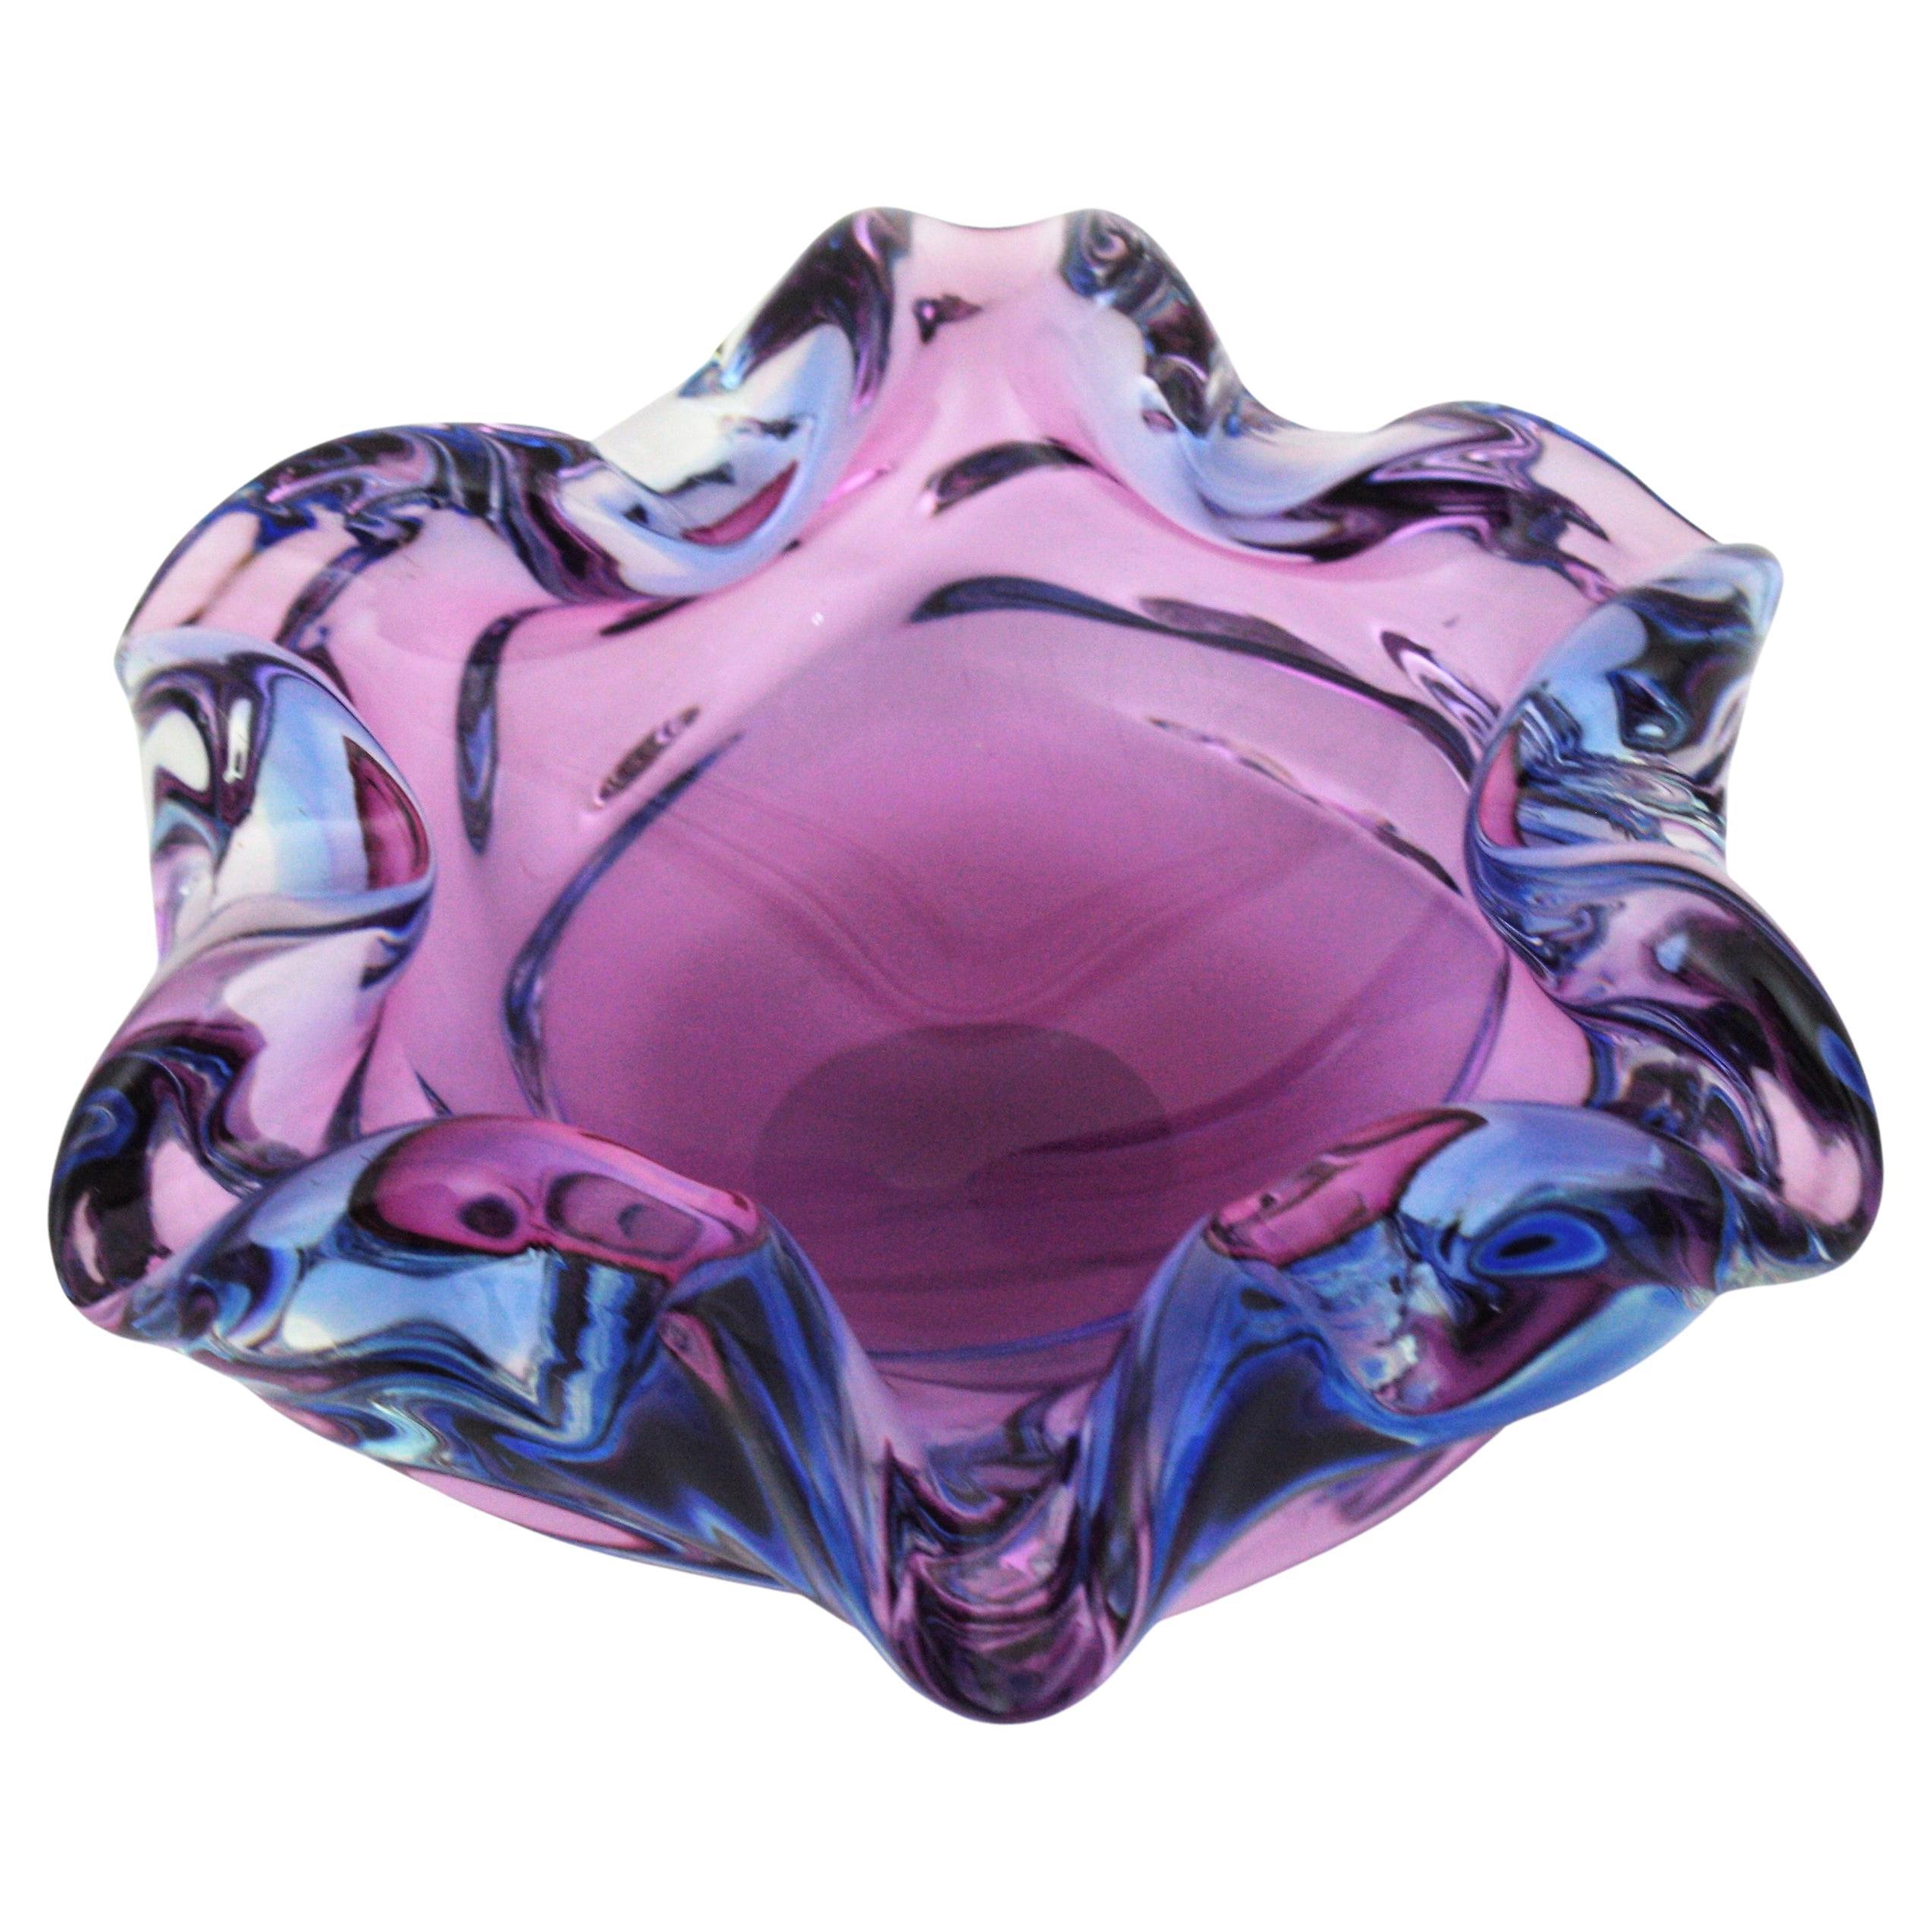 Italian Seguso Murano Pink Purple Sommerso Art Glass Bowl or Ashtray, Italy, 1960s For Sale